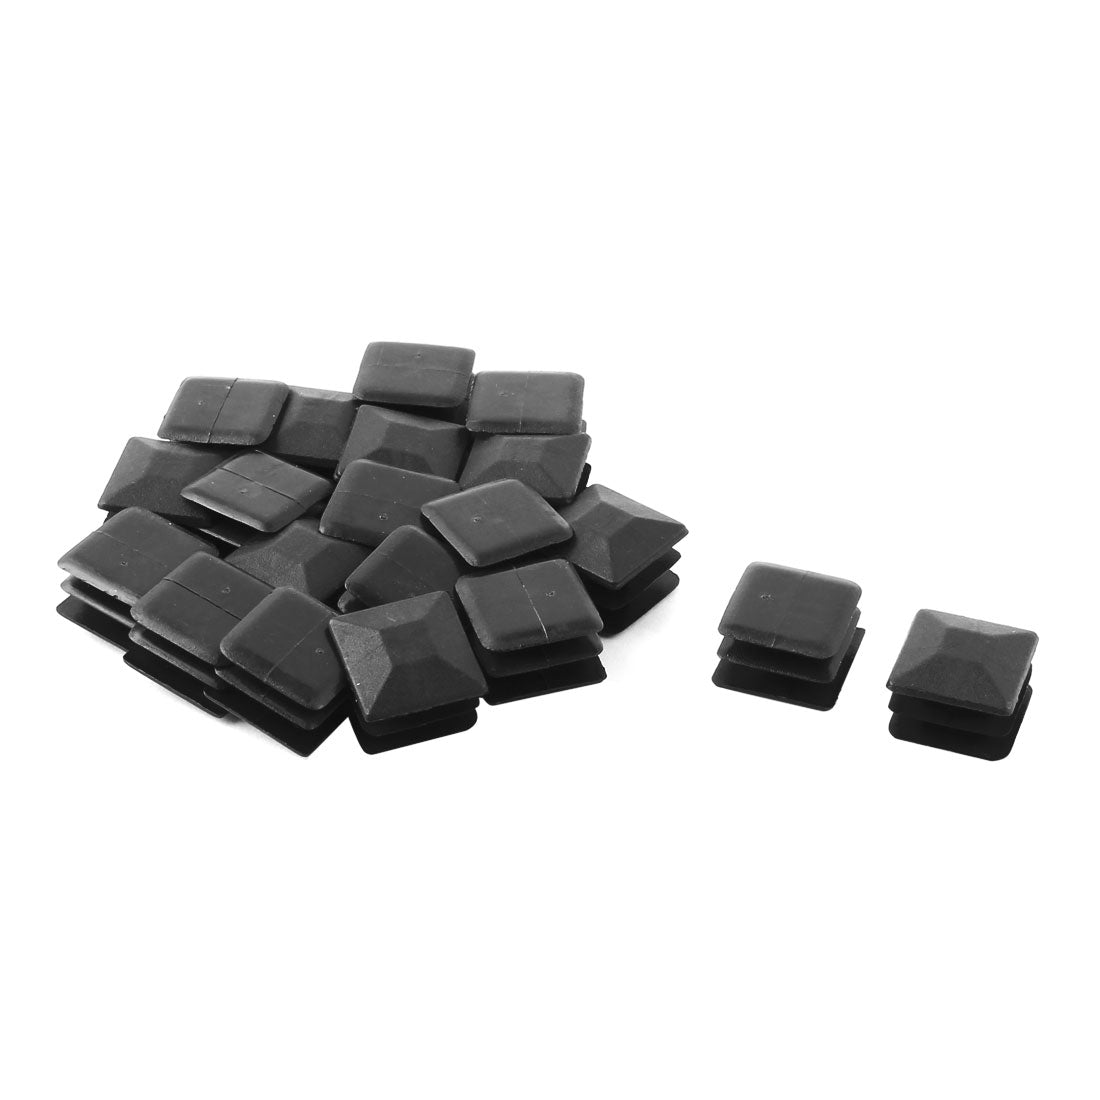 uxcell Uxcell Plastic Square Furniture Chair Legs Tube Insert Black 20mm x 20mm 20 Pcs